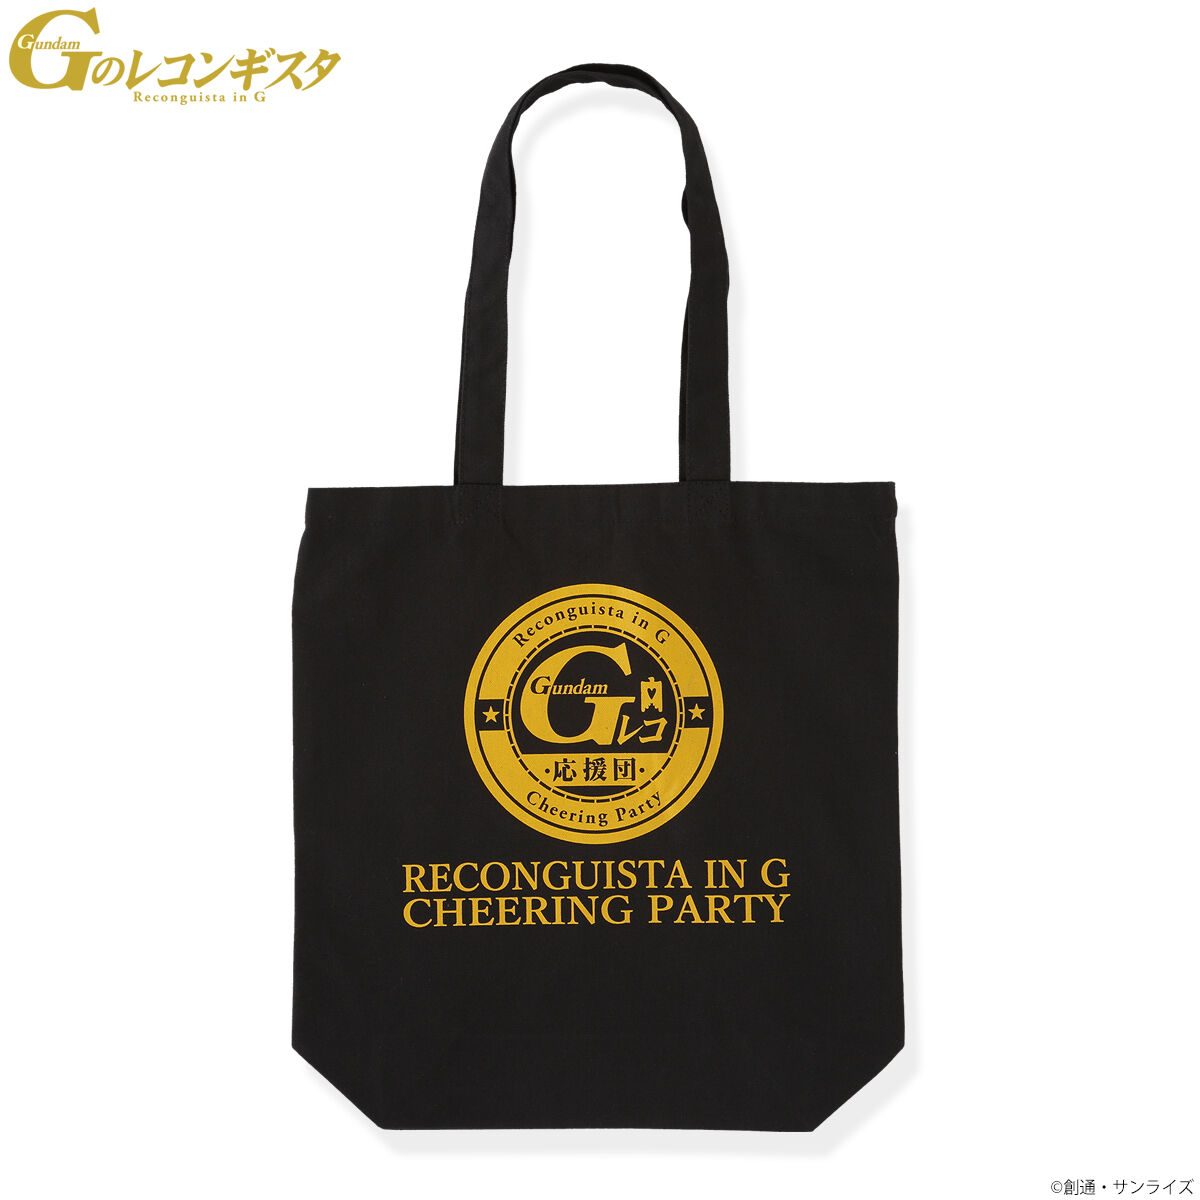 Gundam Reconguista in G Cheering Party Tote Bag—Gundam Reconguista in G